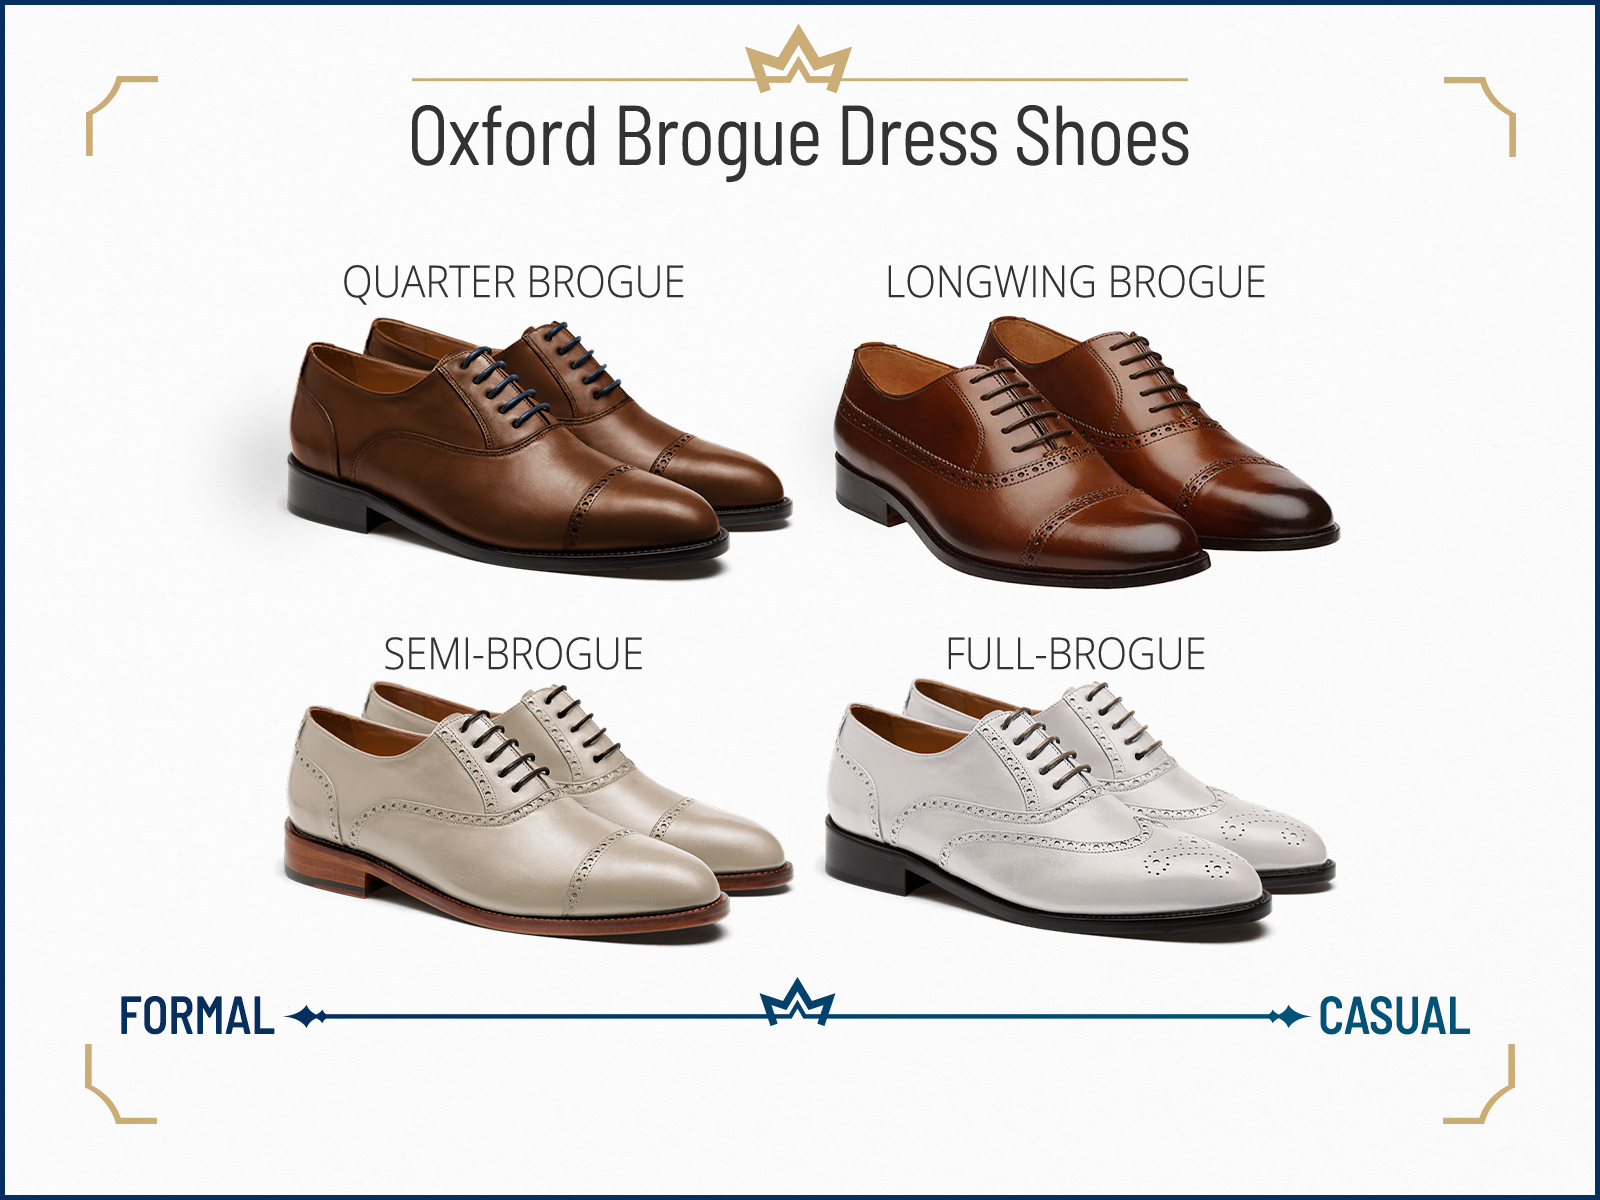 Oxford broguing dress shoes shoes